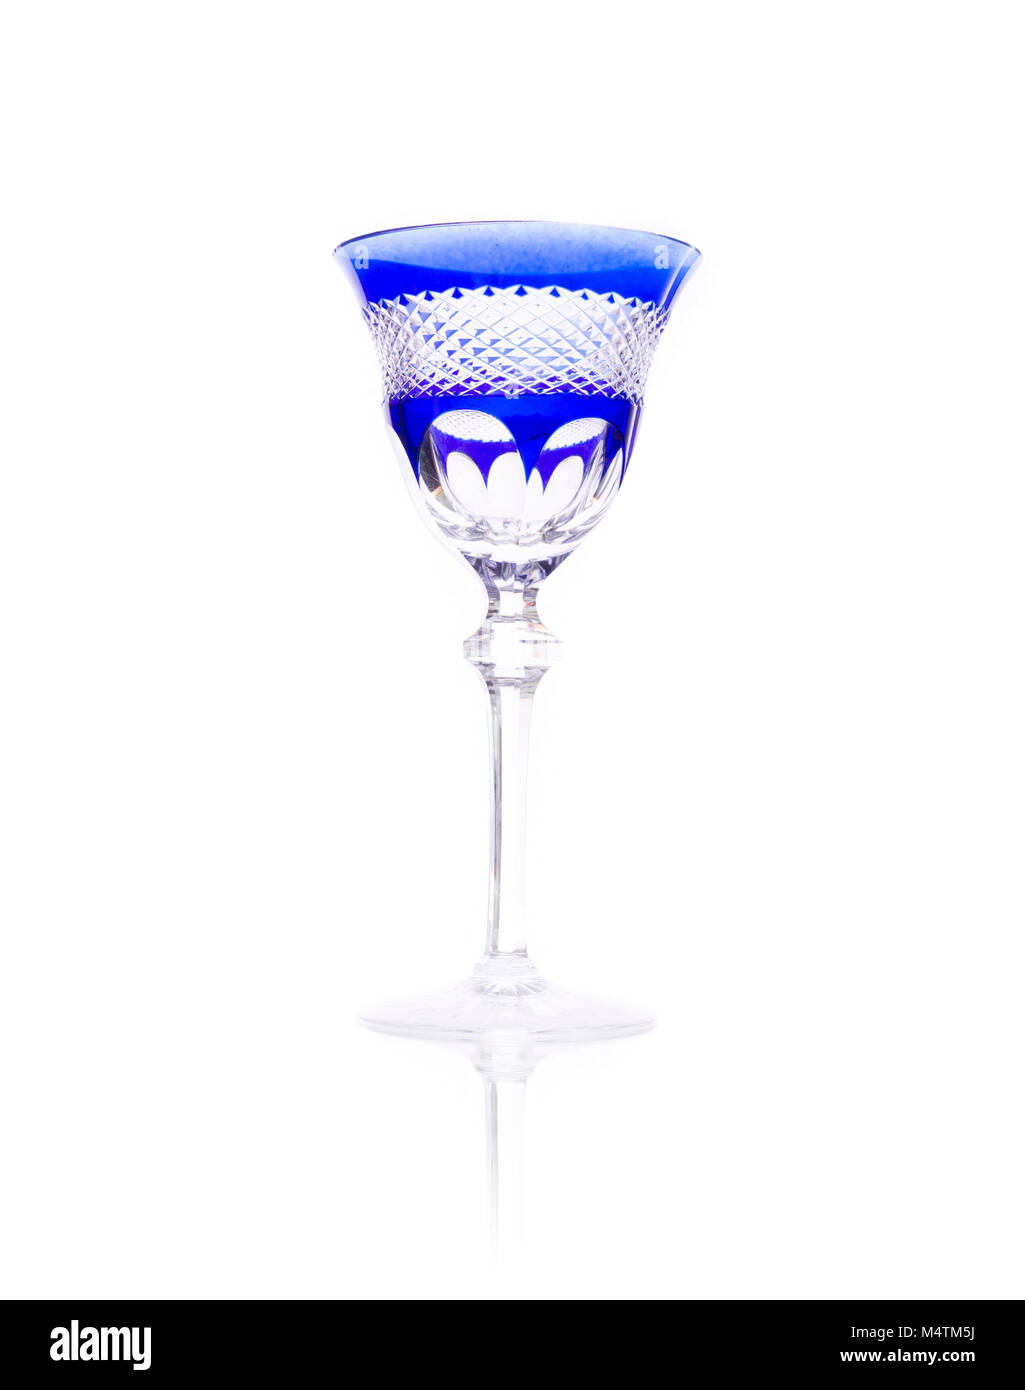 Antique crystal wineglass isolated on white background Stock Photo